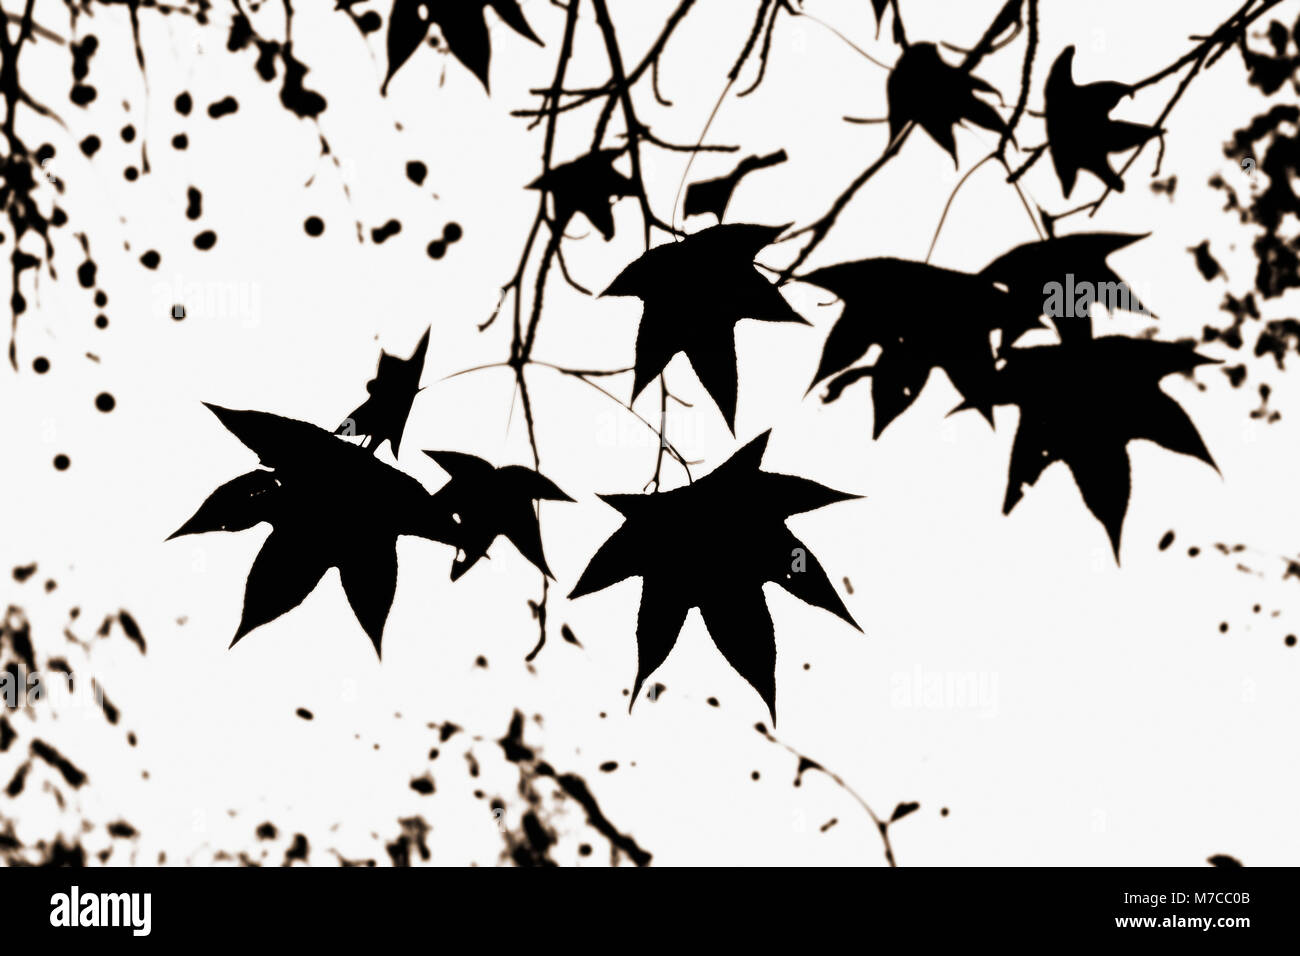 Maple leaves on a tree Stock Photo